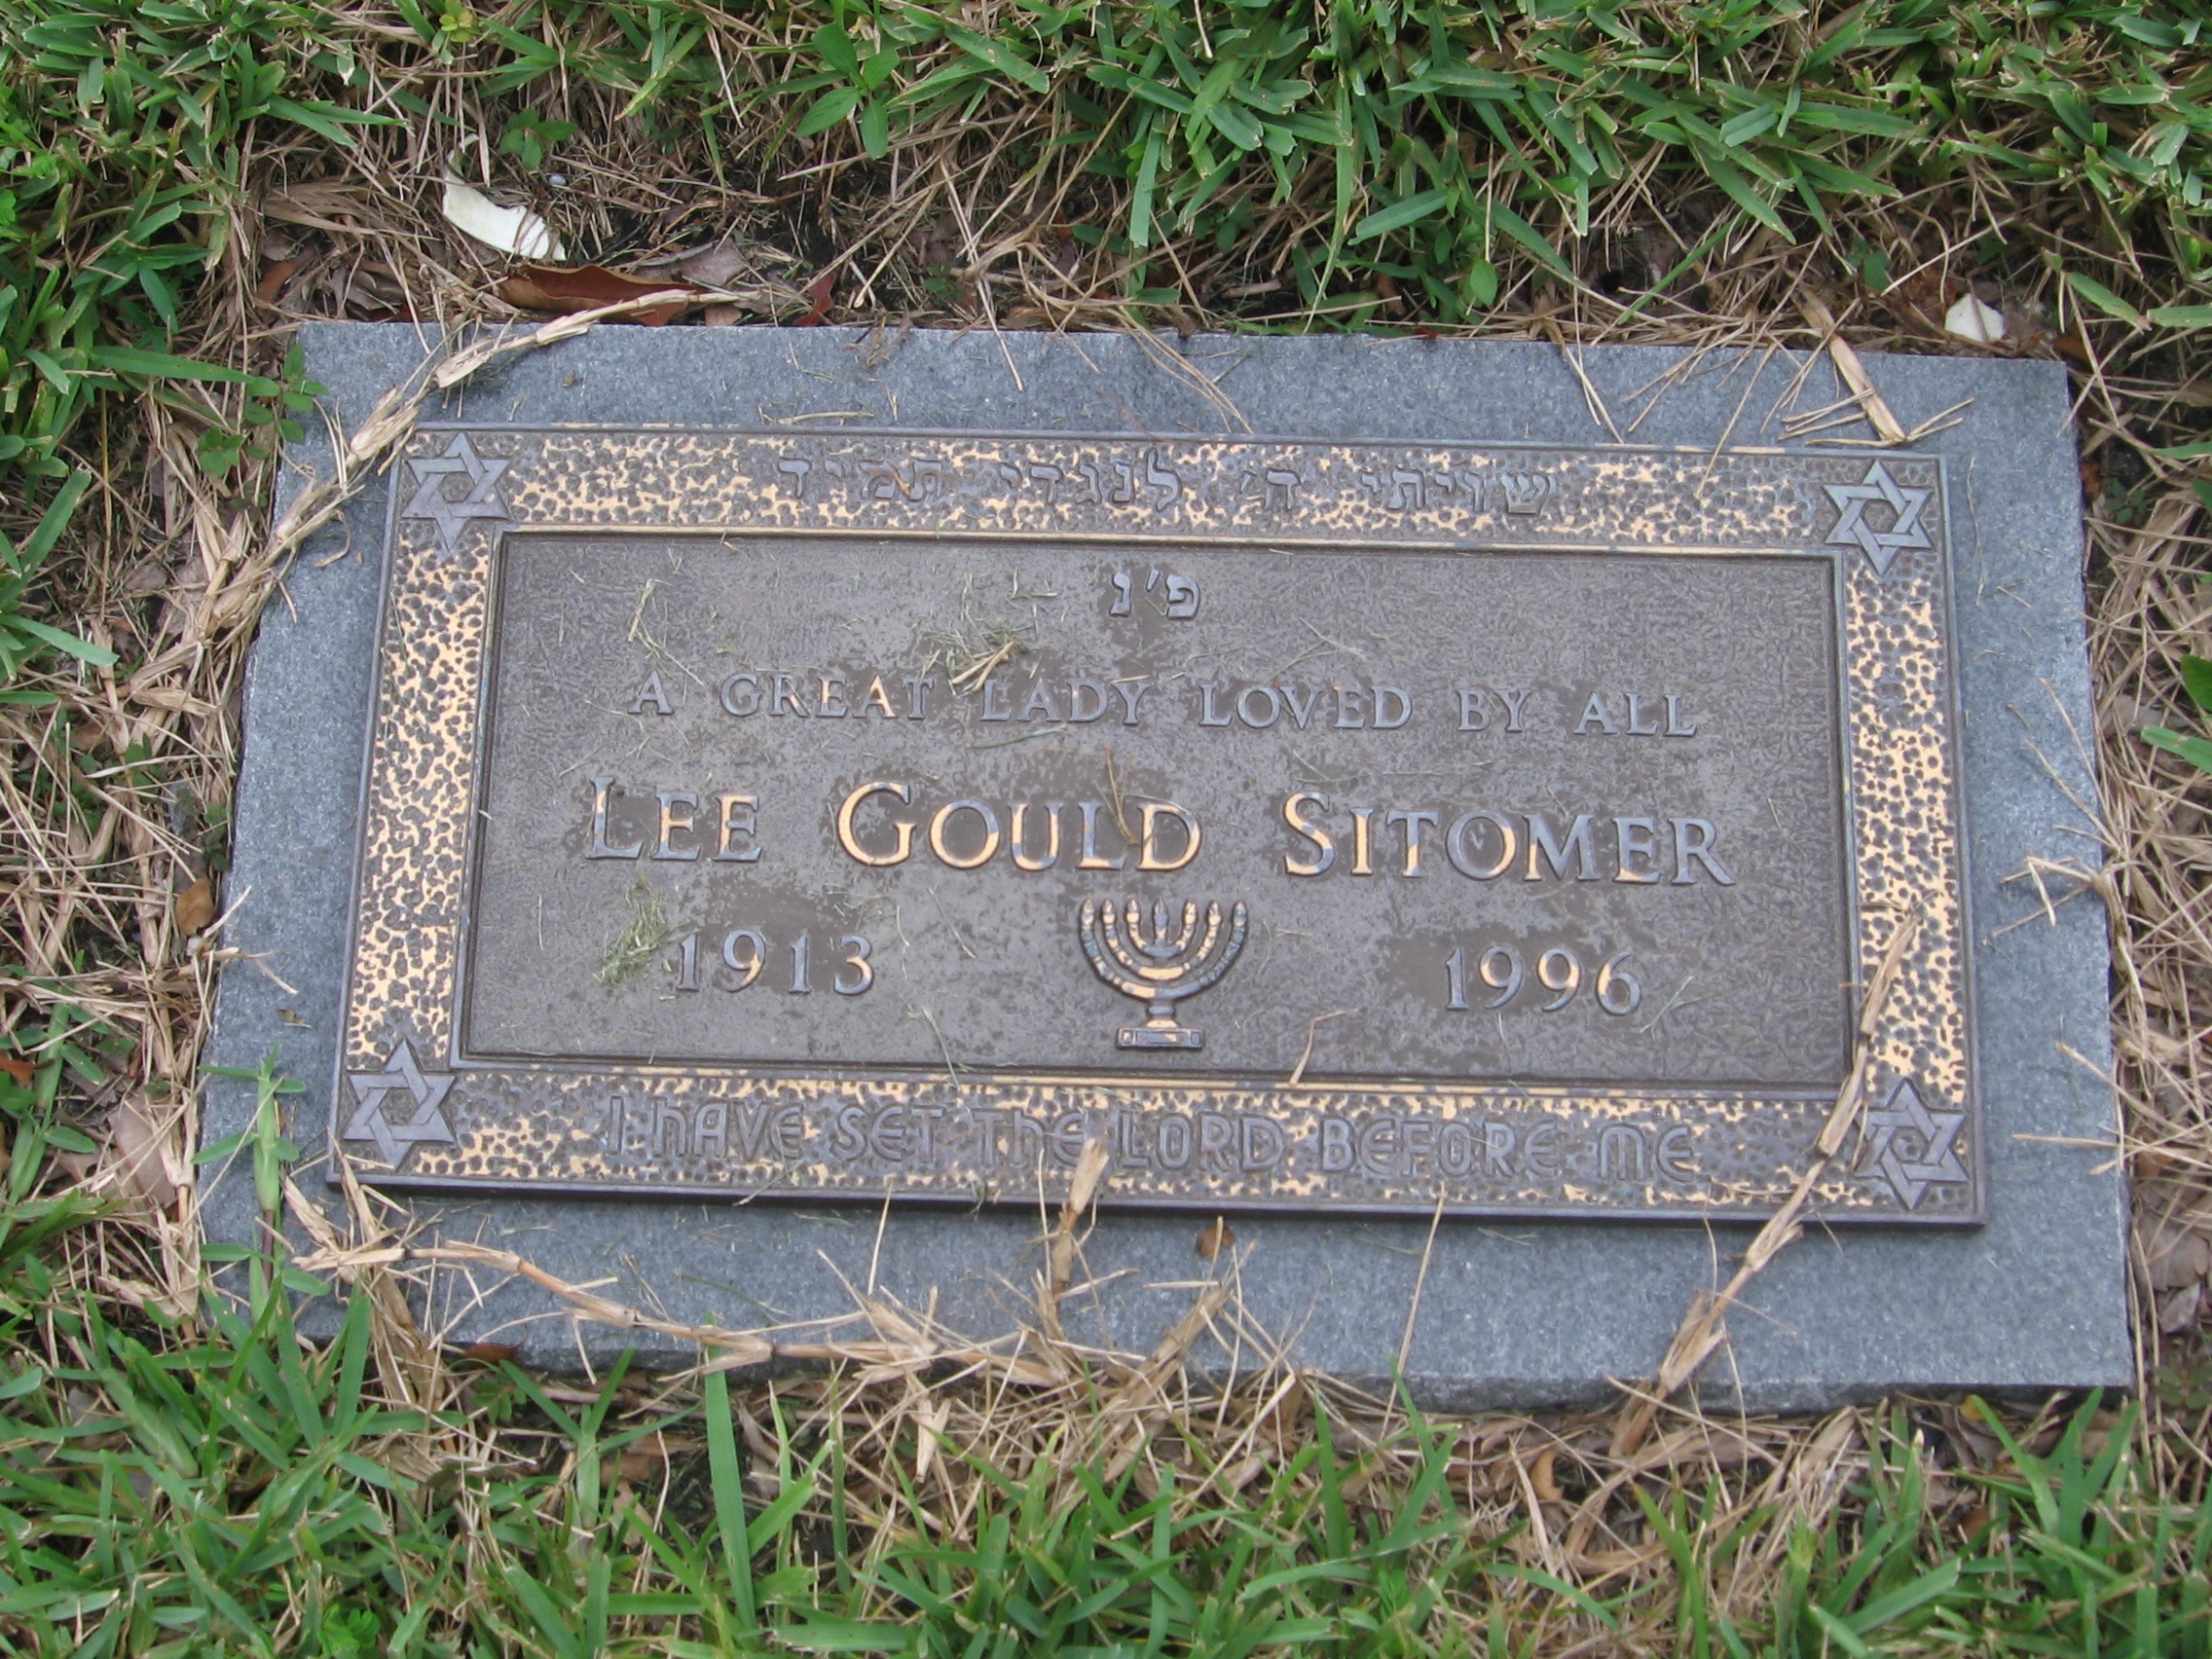 Lee Gould Sitomer